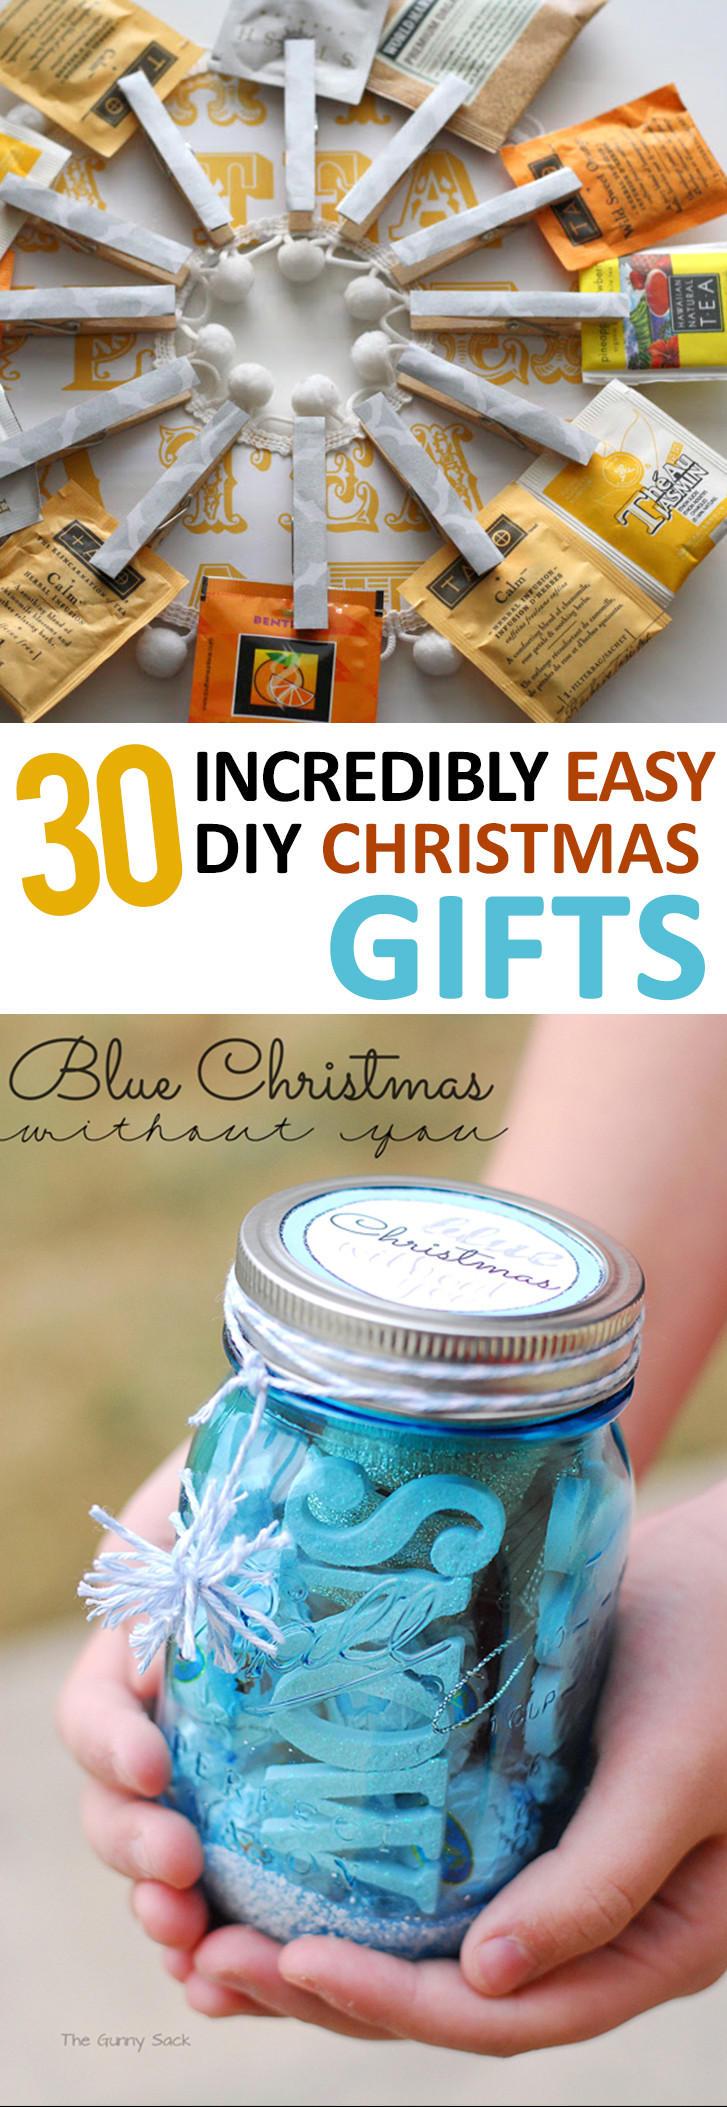 Simple DIY Christmas Gifts
 30 Incredibly Easy DIY Christmas Gifts – Sunlit Spaces